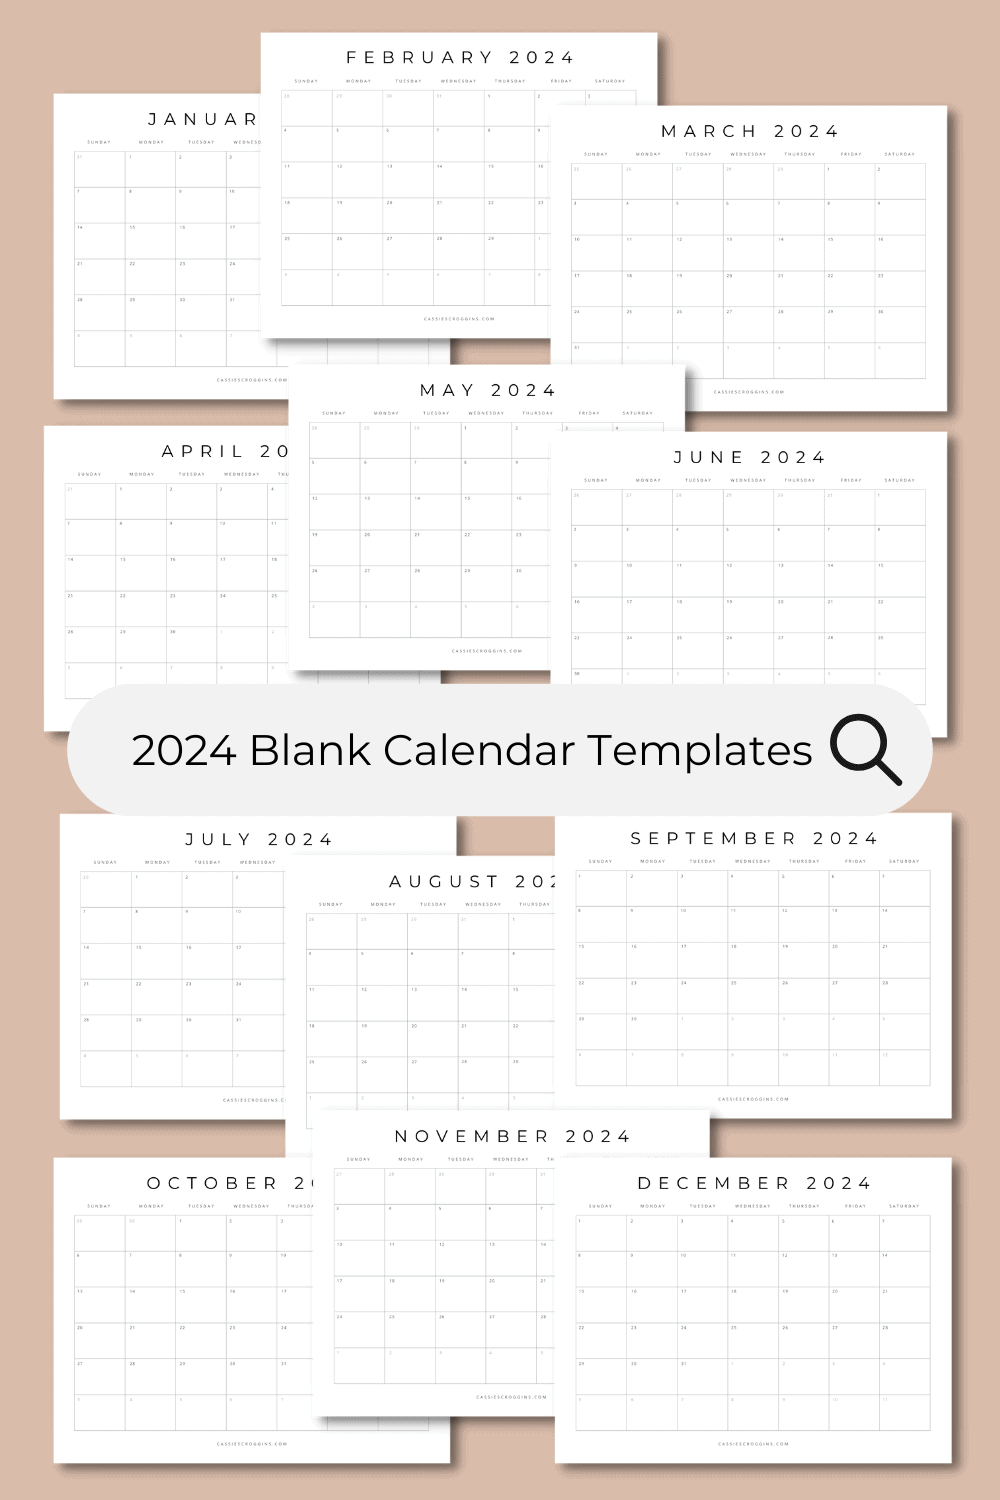 Free Printable 2024 Blank Calendar Templates (All 12 Months) intended for Free Printable Calendar 2024 No Downloads